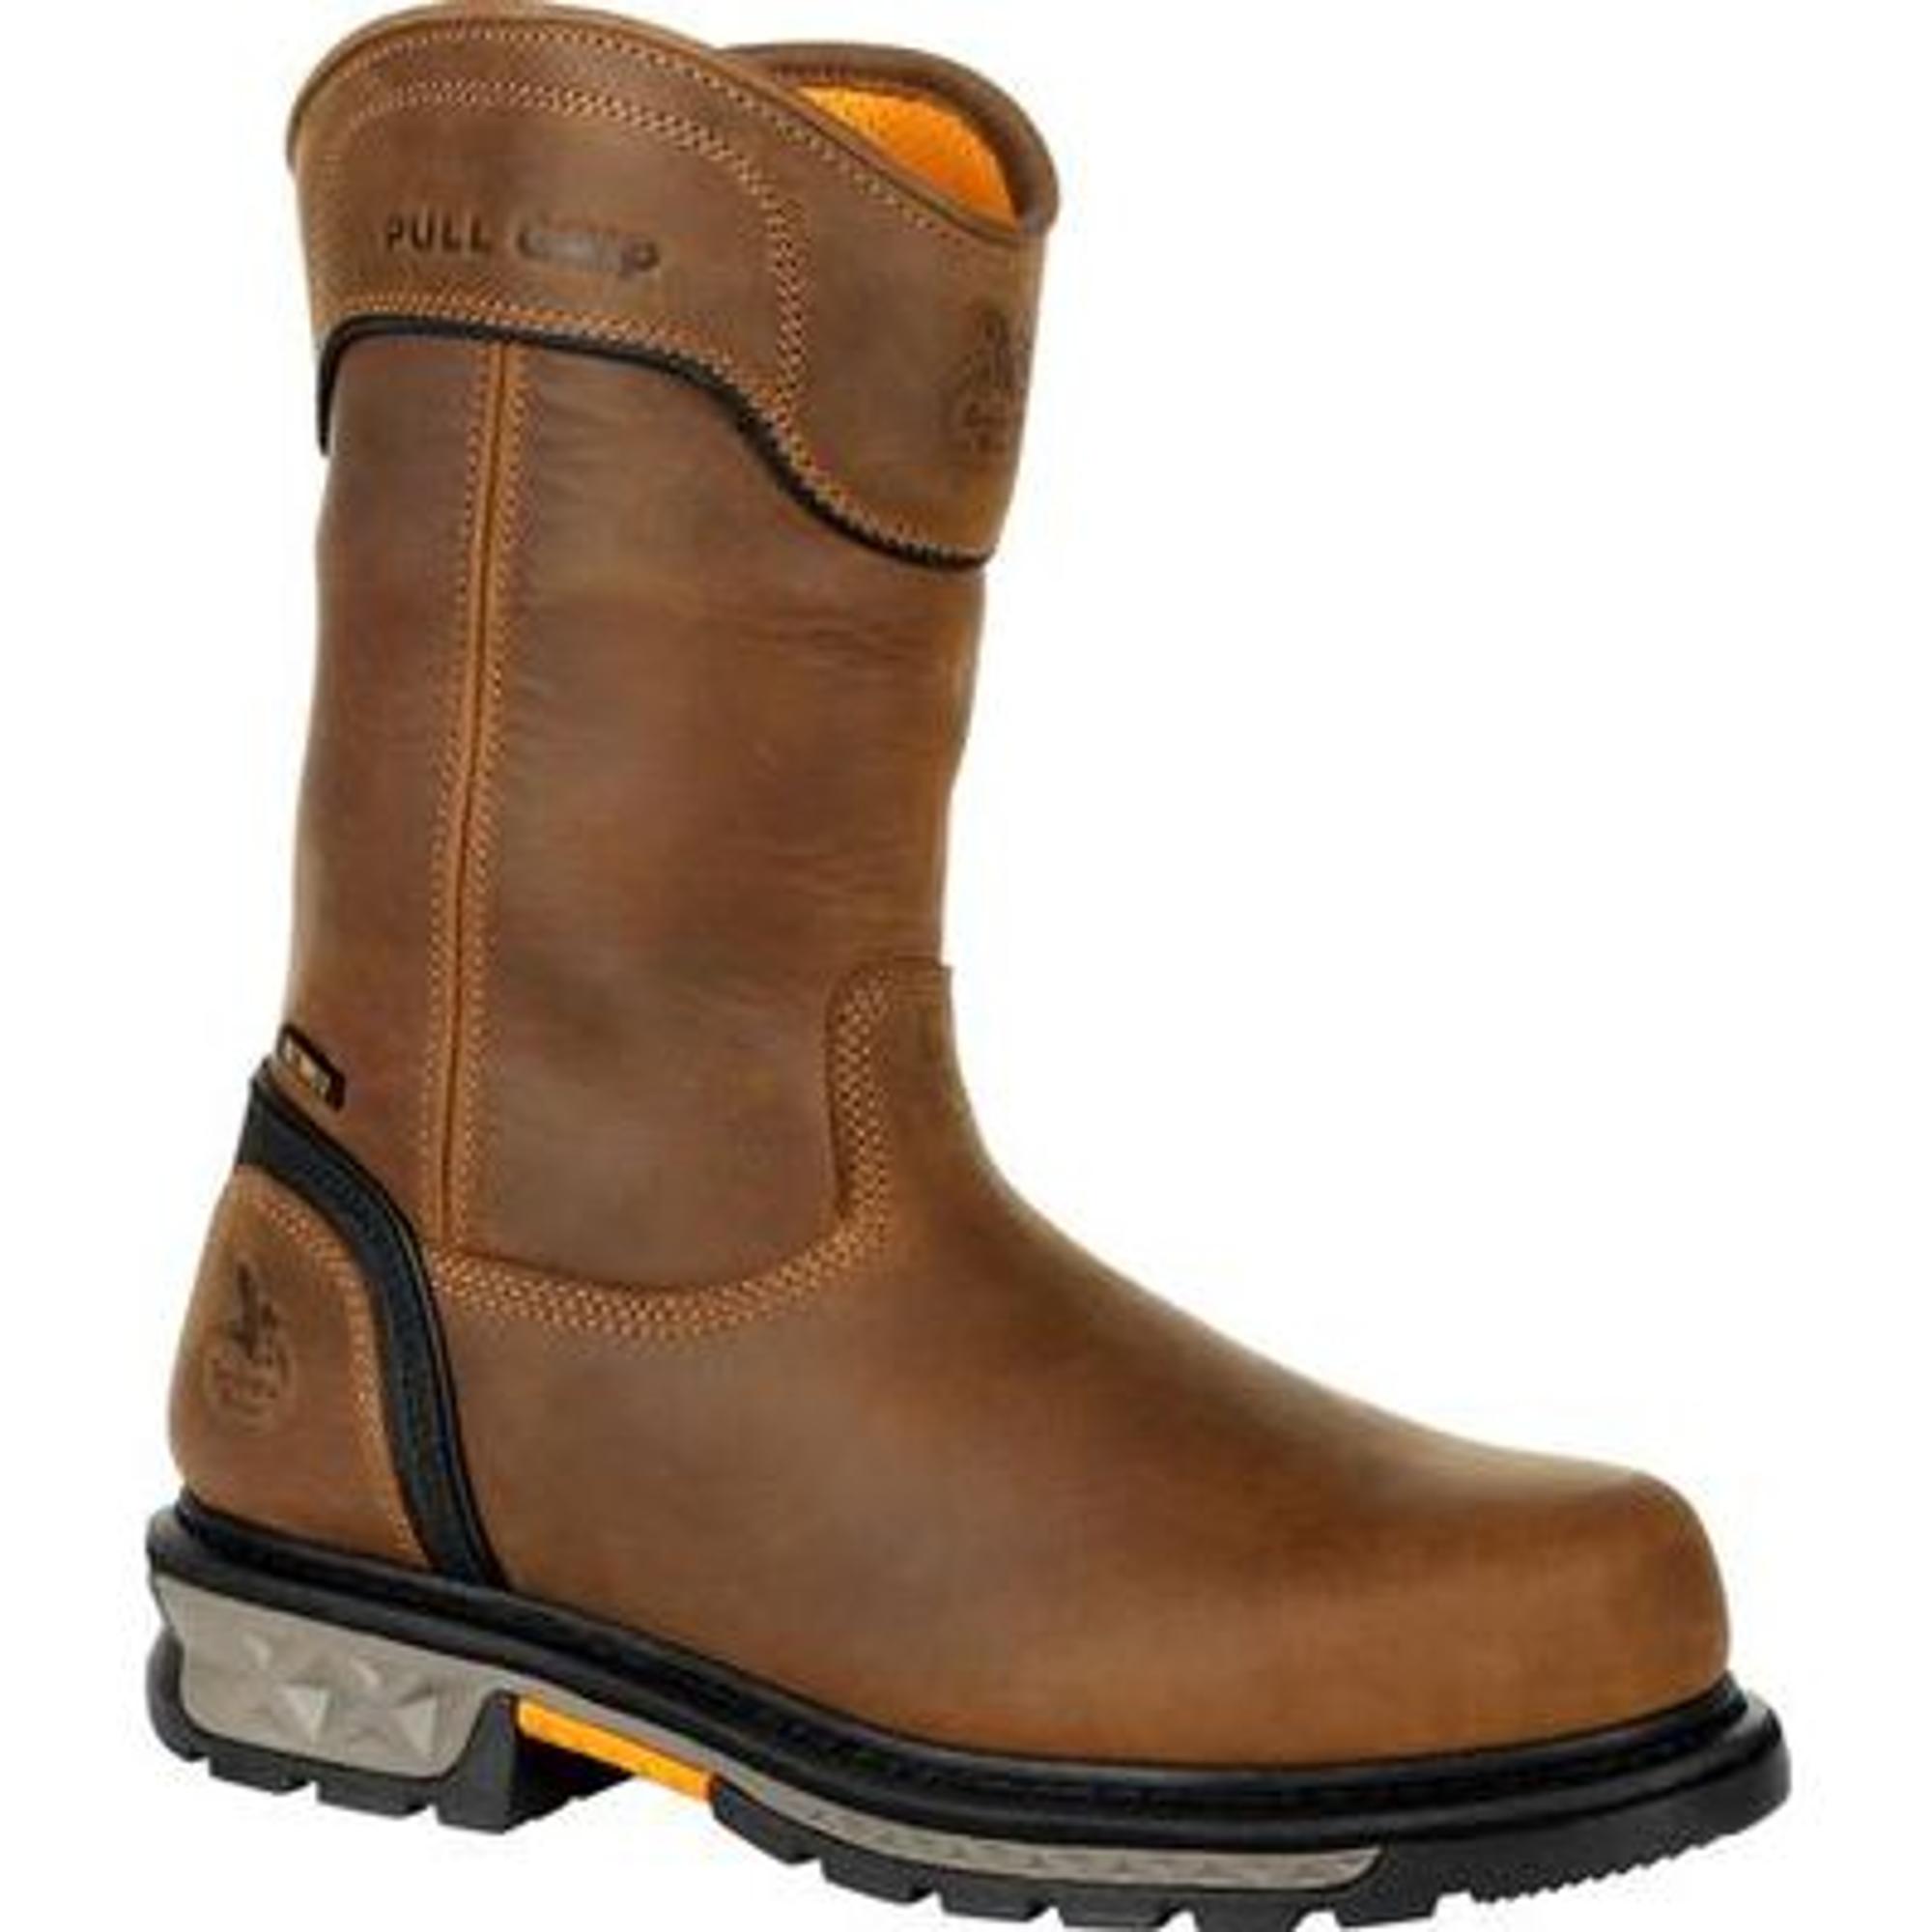 Georgia Boot Carbo- Tec Ltx Waterproof Composite Toe Pull On Boots